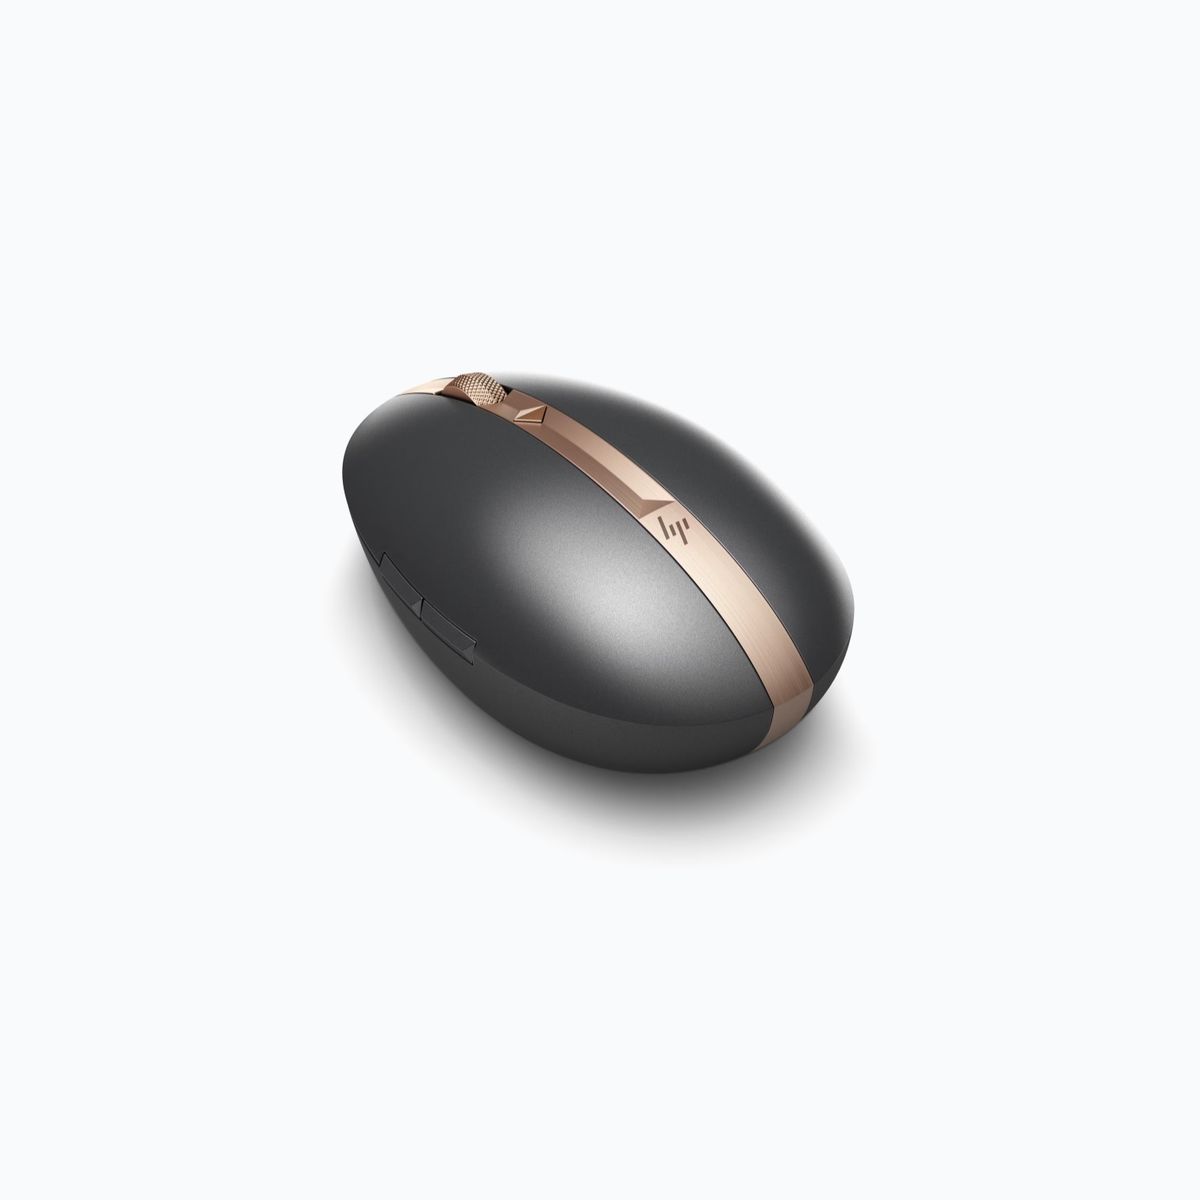 hp-spectre-mouse-700--new-2.jpg